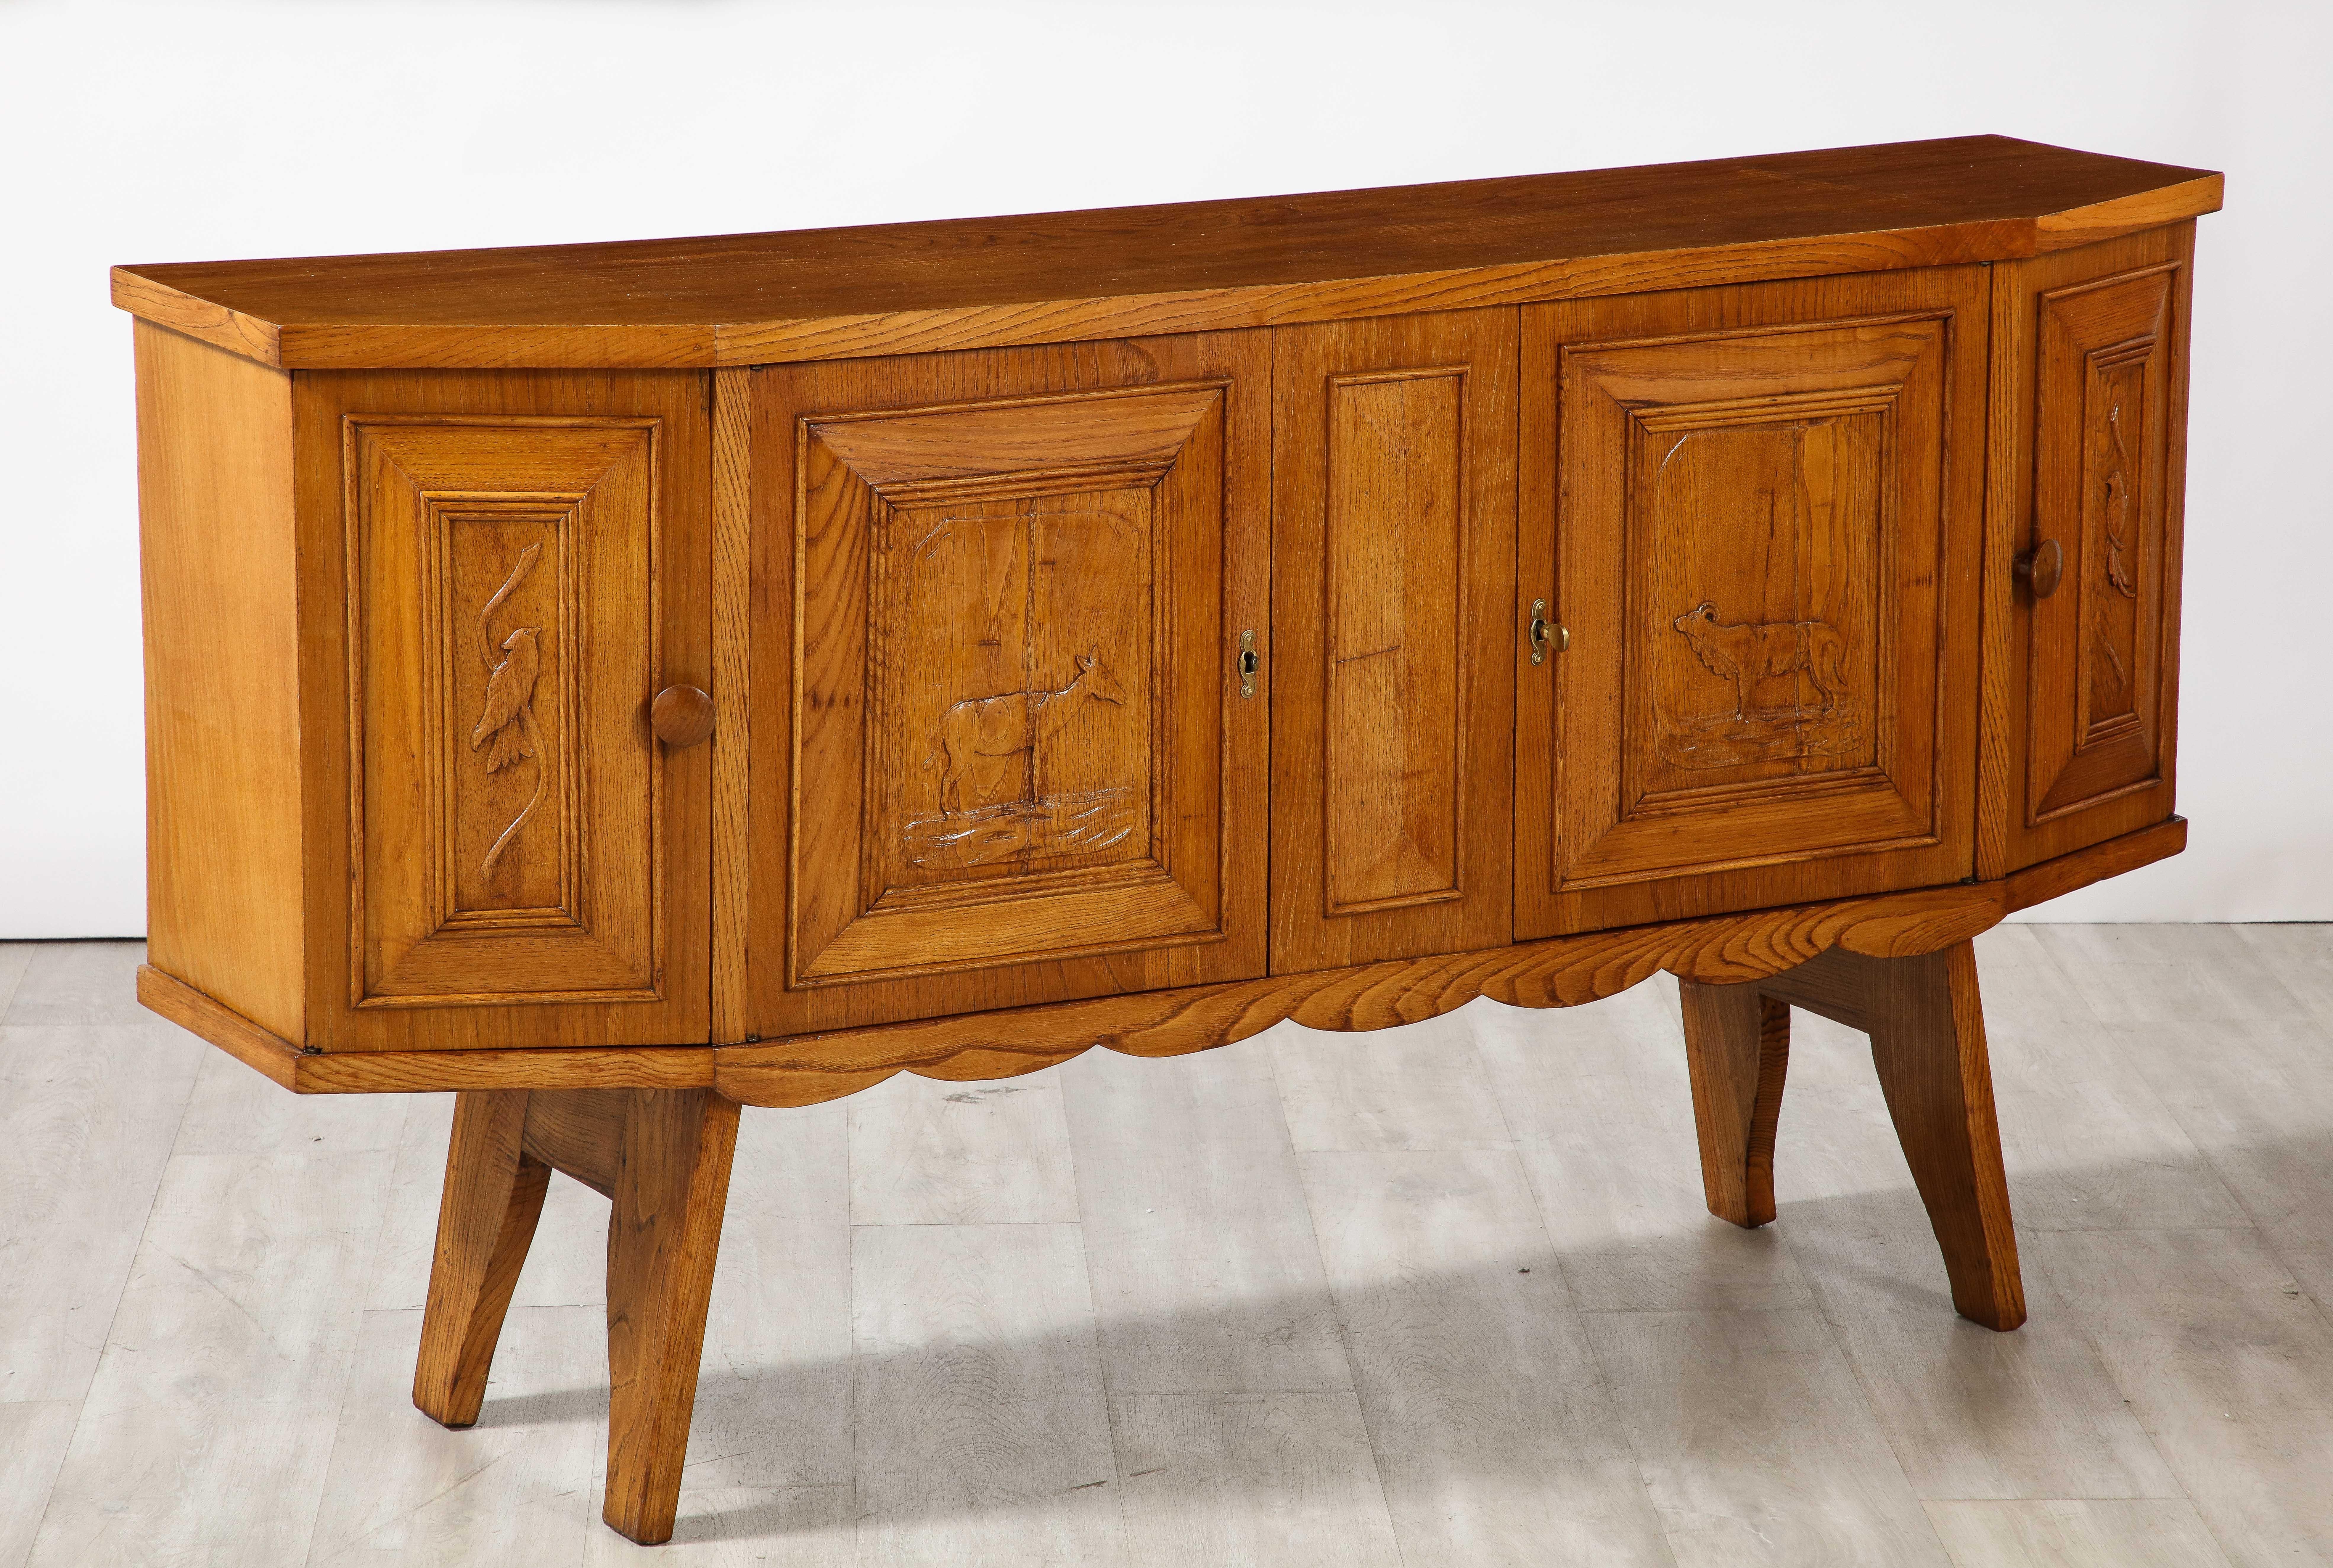 Italian Tuscan Art Deco Carved Oak Sideboard or Credenza, circa 1940 For Sale 10